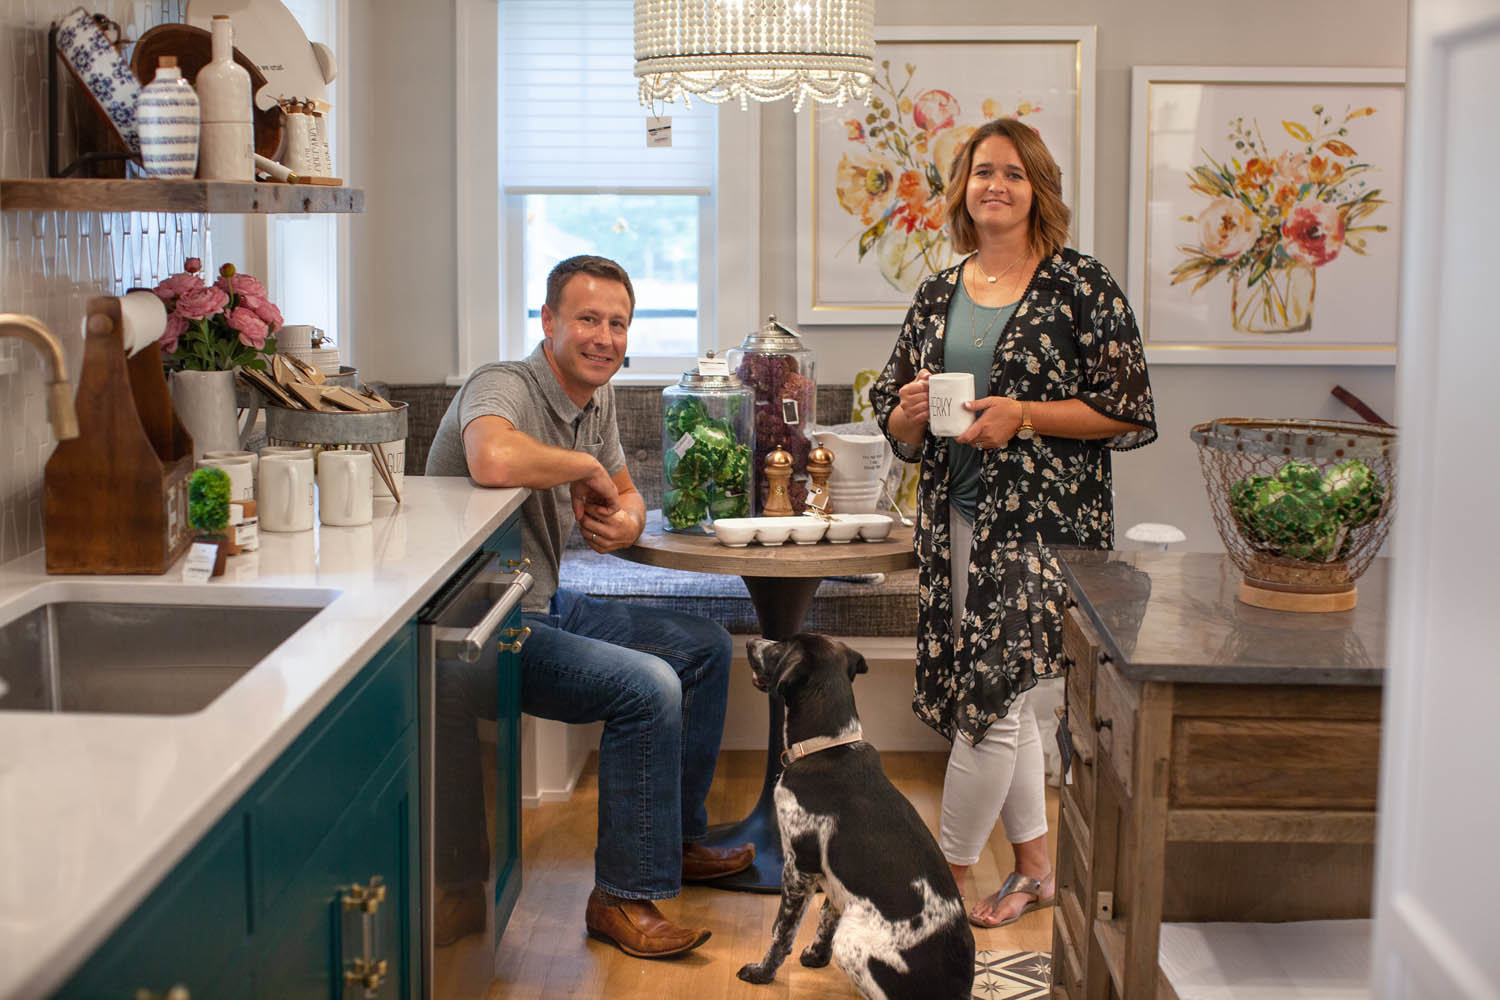 Owners Brady and Haden Long of Ellecor Design and Gifts have settled into the neighborhood.